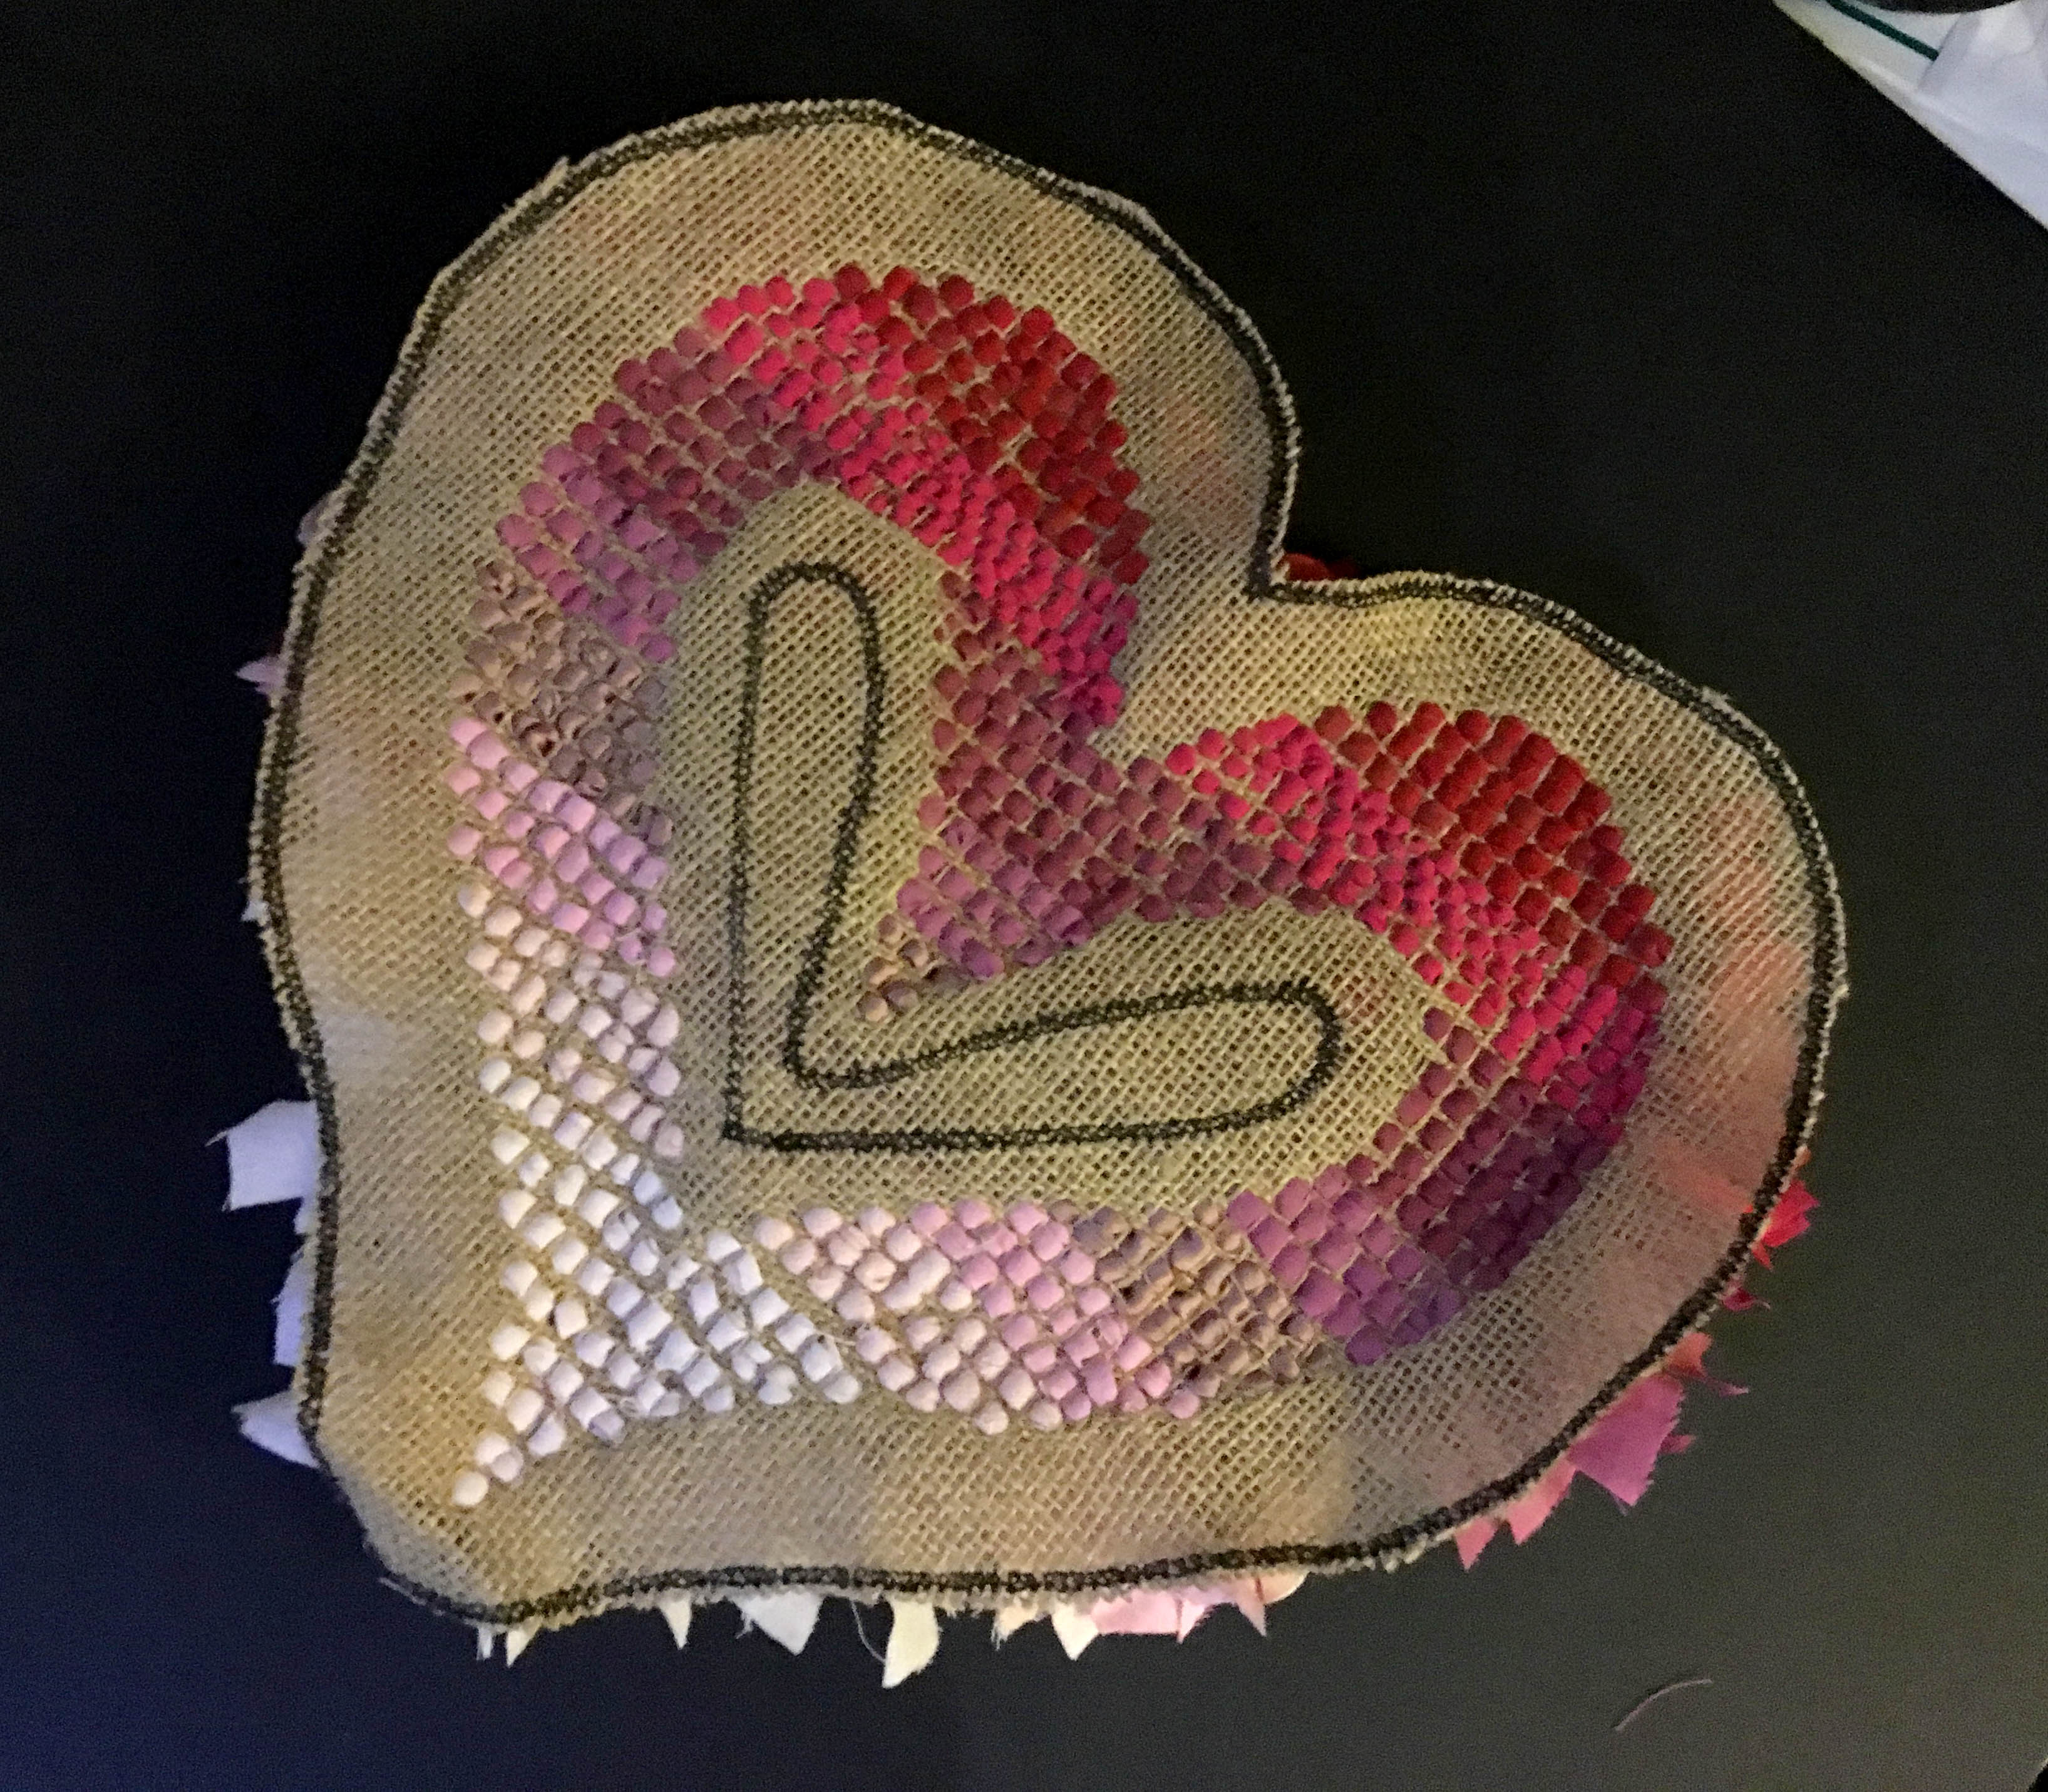 Back of Shaggy Rag Rug Heart on the Hessian in red, pink and white